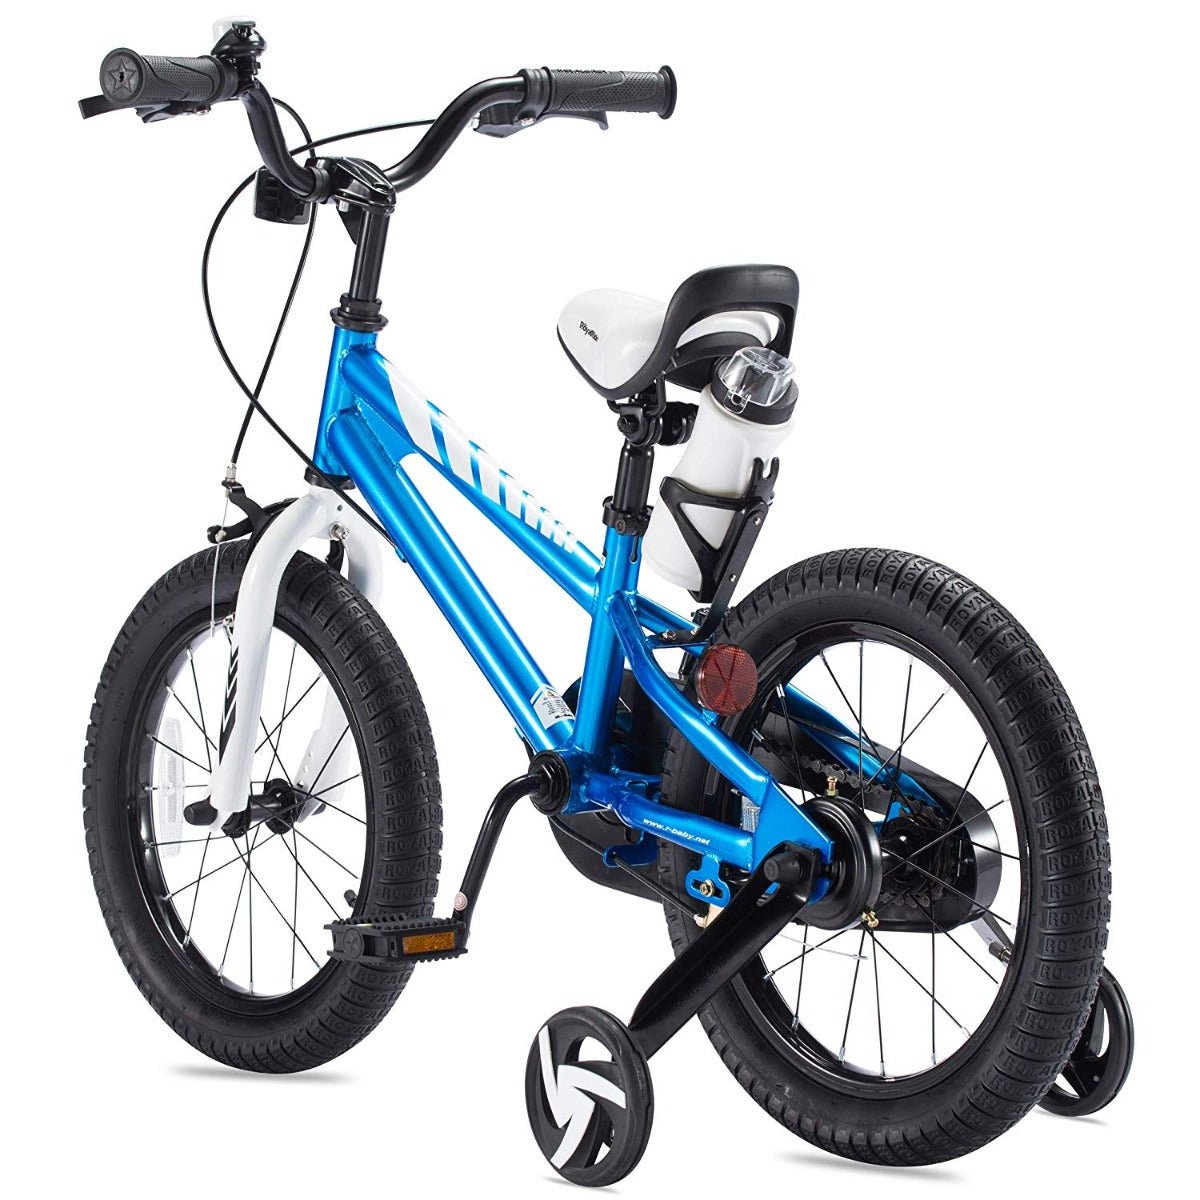 RoyalBaby Freestyle Children’s Pedal Bicycle & Stabilisers 12” Wheel - Blue